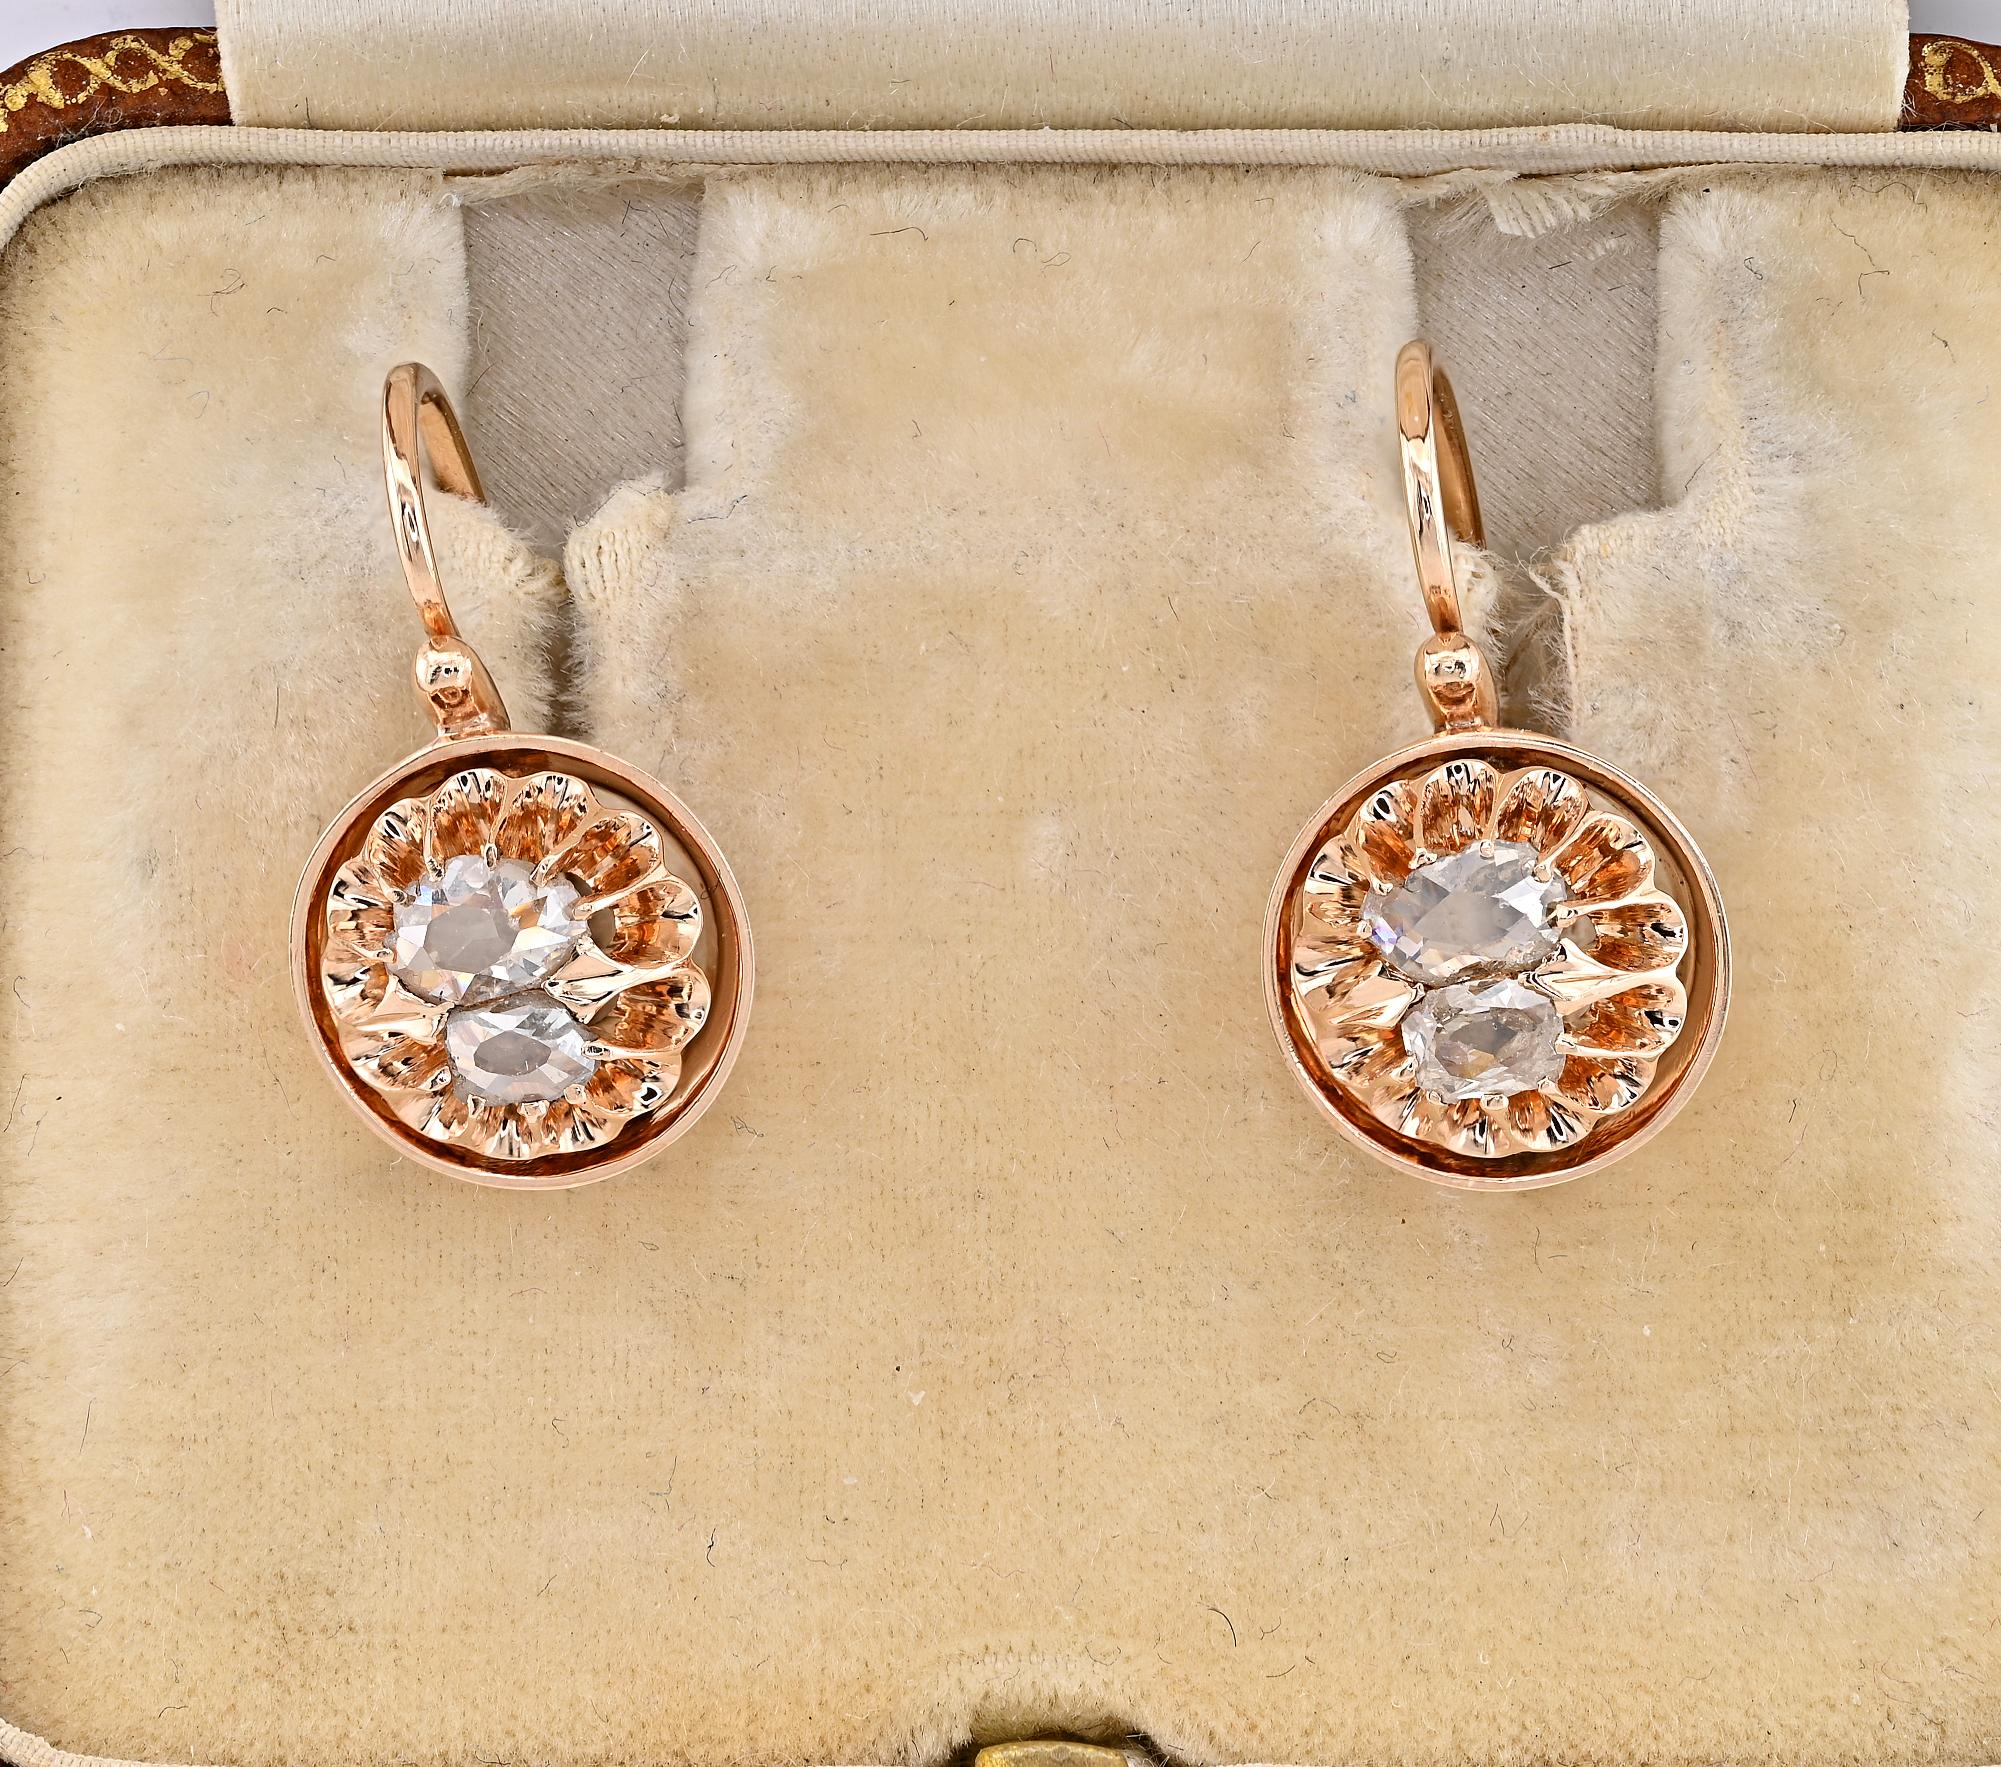 Victorian Treasure
Sweatiest antique Victorian Diamond Earrings, lovely in design, artful crafted in 18 Kt gold
Set with four beautiful bright white antique table cut Diamond, in group of two on each earring, totalling .60 Ct , rated G/H VS/SI,